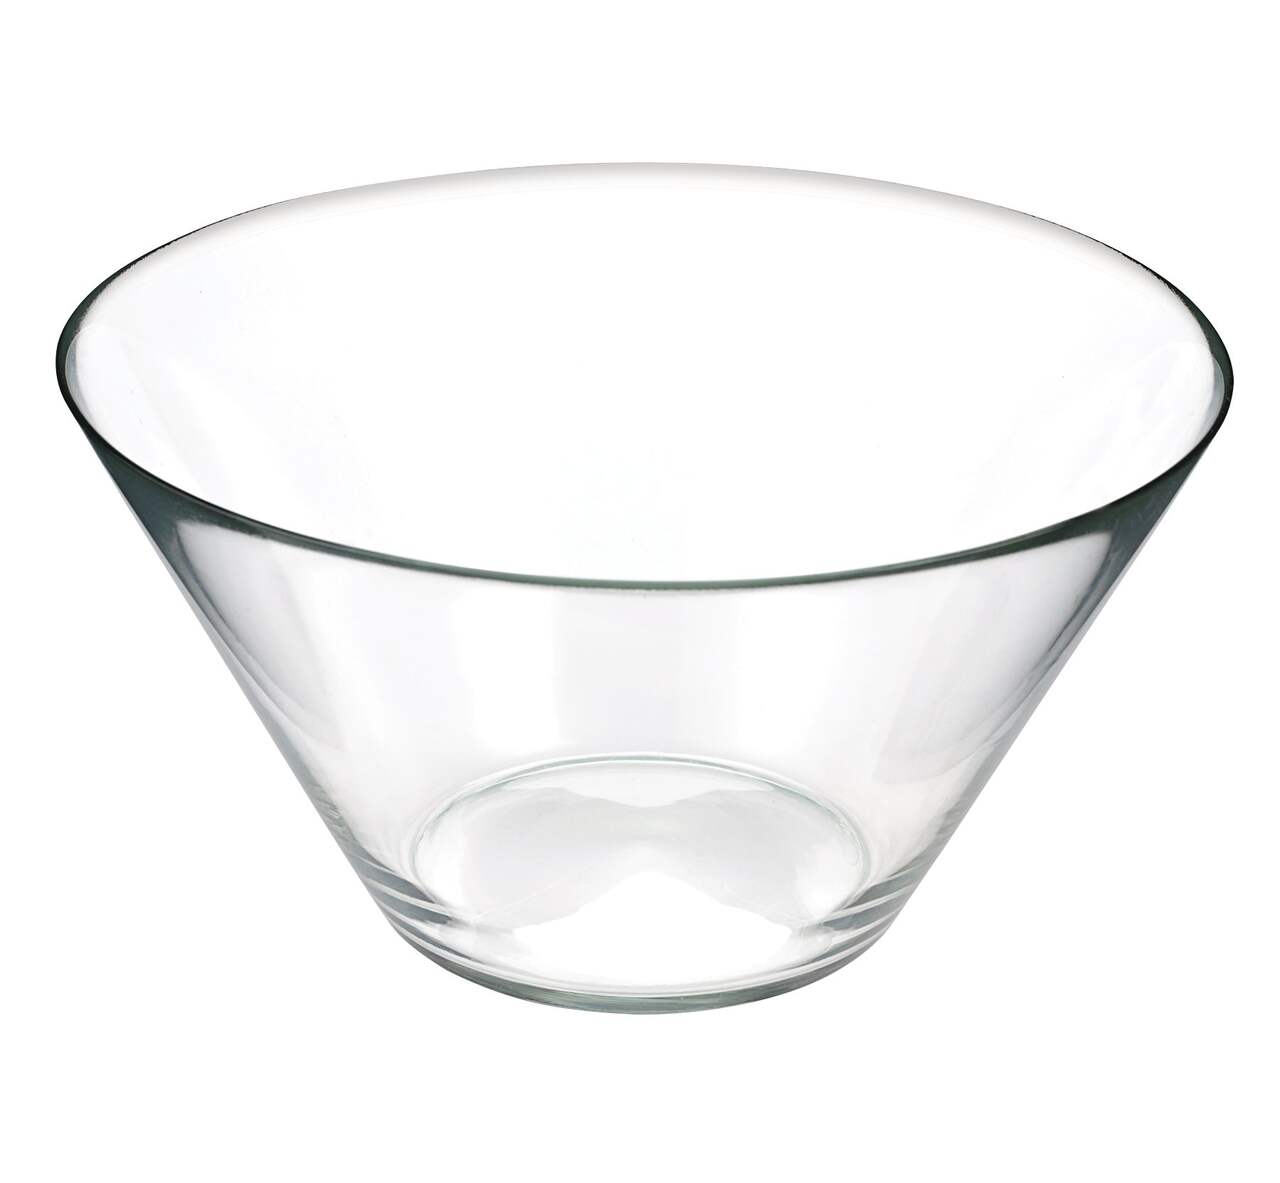 https://media-www.canadiantire.ca/product/living/kitchen/dining-and-entertaining/1428198/glass-serve-bowl-28cm-e160e8ec-2a99-4214-a6d9-e10d50797048-jpgrendition.jpg?imdensity=1&imwidth=640&impolicy=mZoom